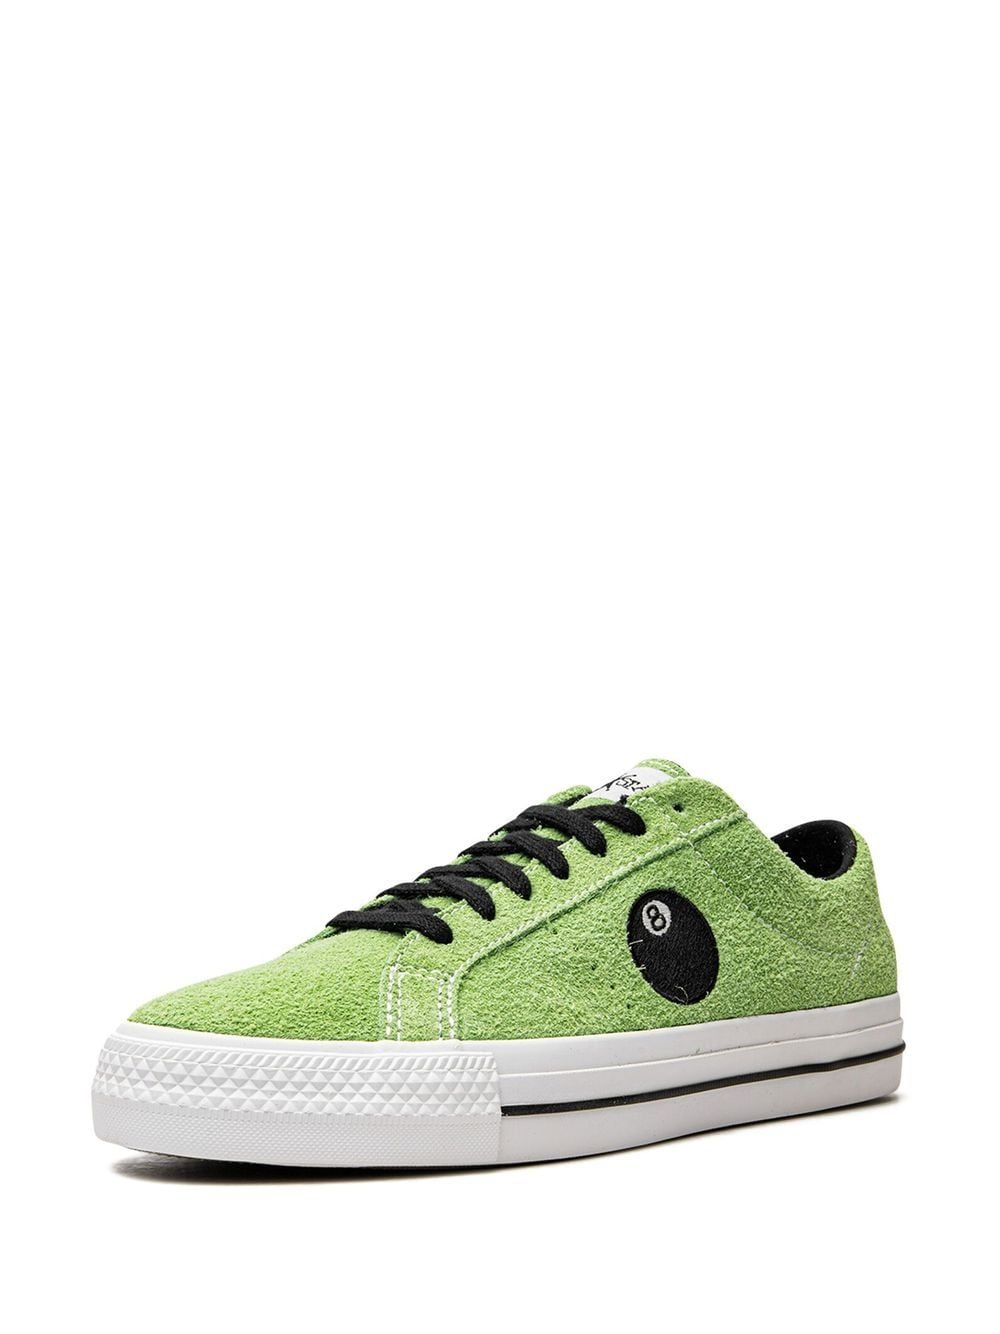 Shop Converse X Stüssy One Star Pro "8-ball" Sneakers In Green